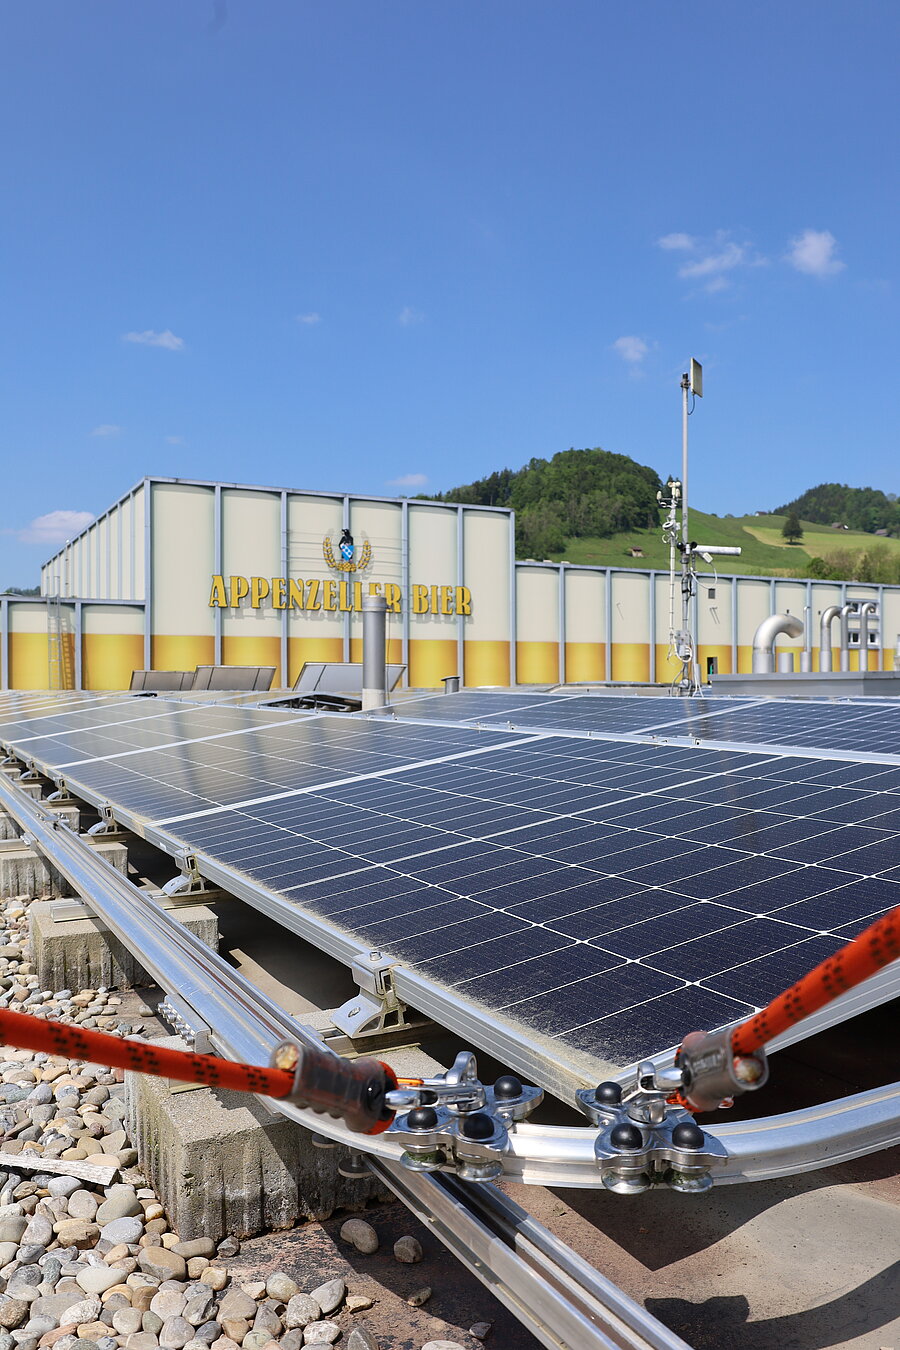 TAURUS secures PV systems on the roof - Appenzell Brewery